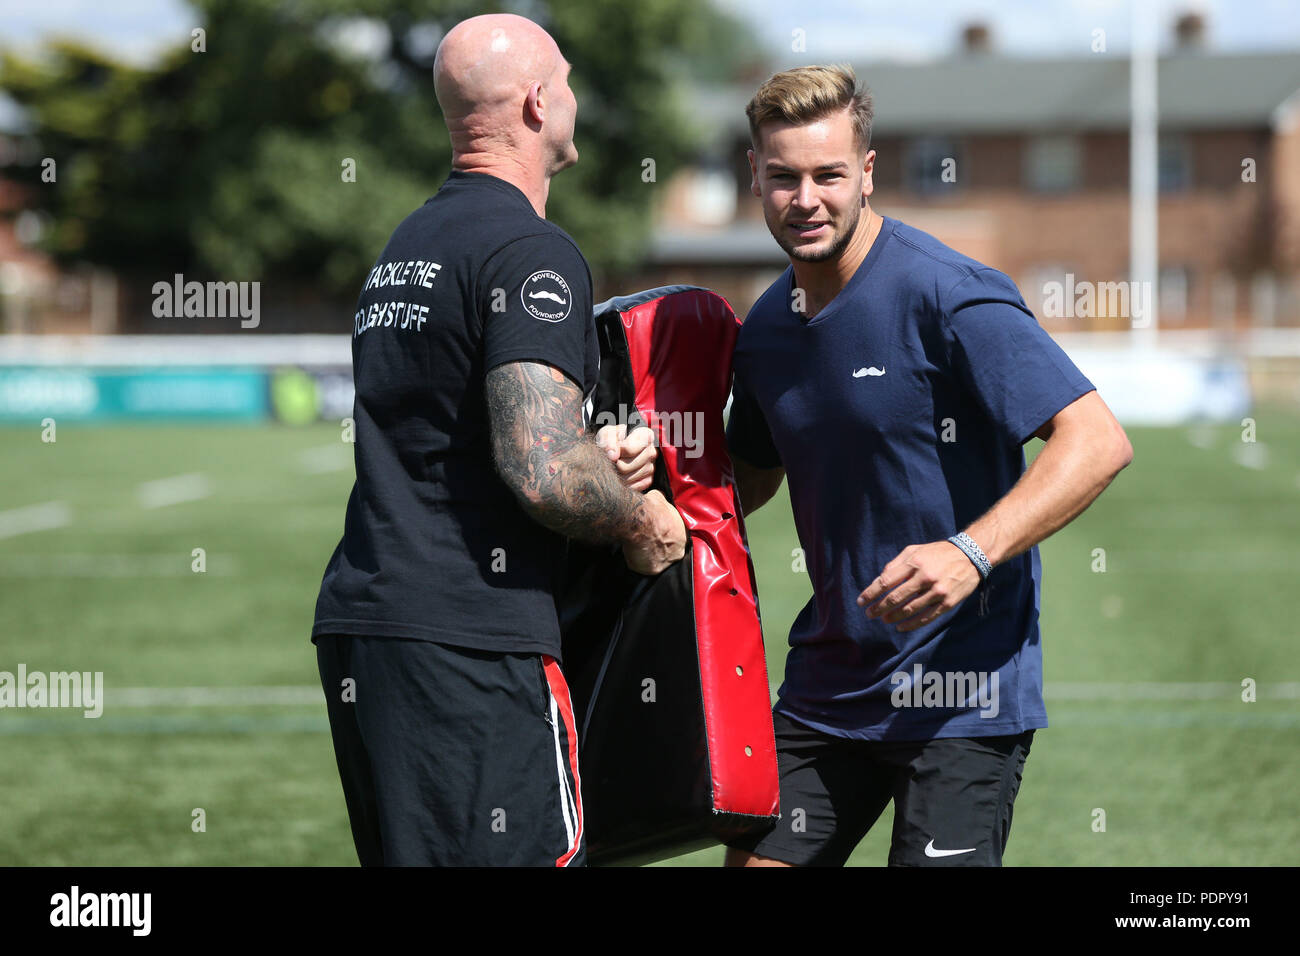 Reality TV star Chris Hughes (right) with former England Rugby League professional Keith Senior, in training in Ealing, London, representing The Movember Foundation in the Half Time Challenge at the Challenge Cup final on Saturday 25th August. Stock Photo